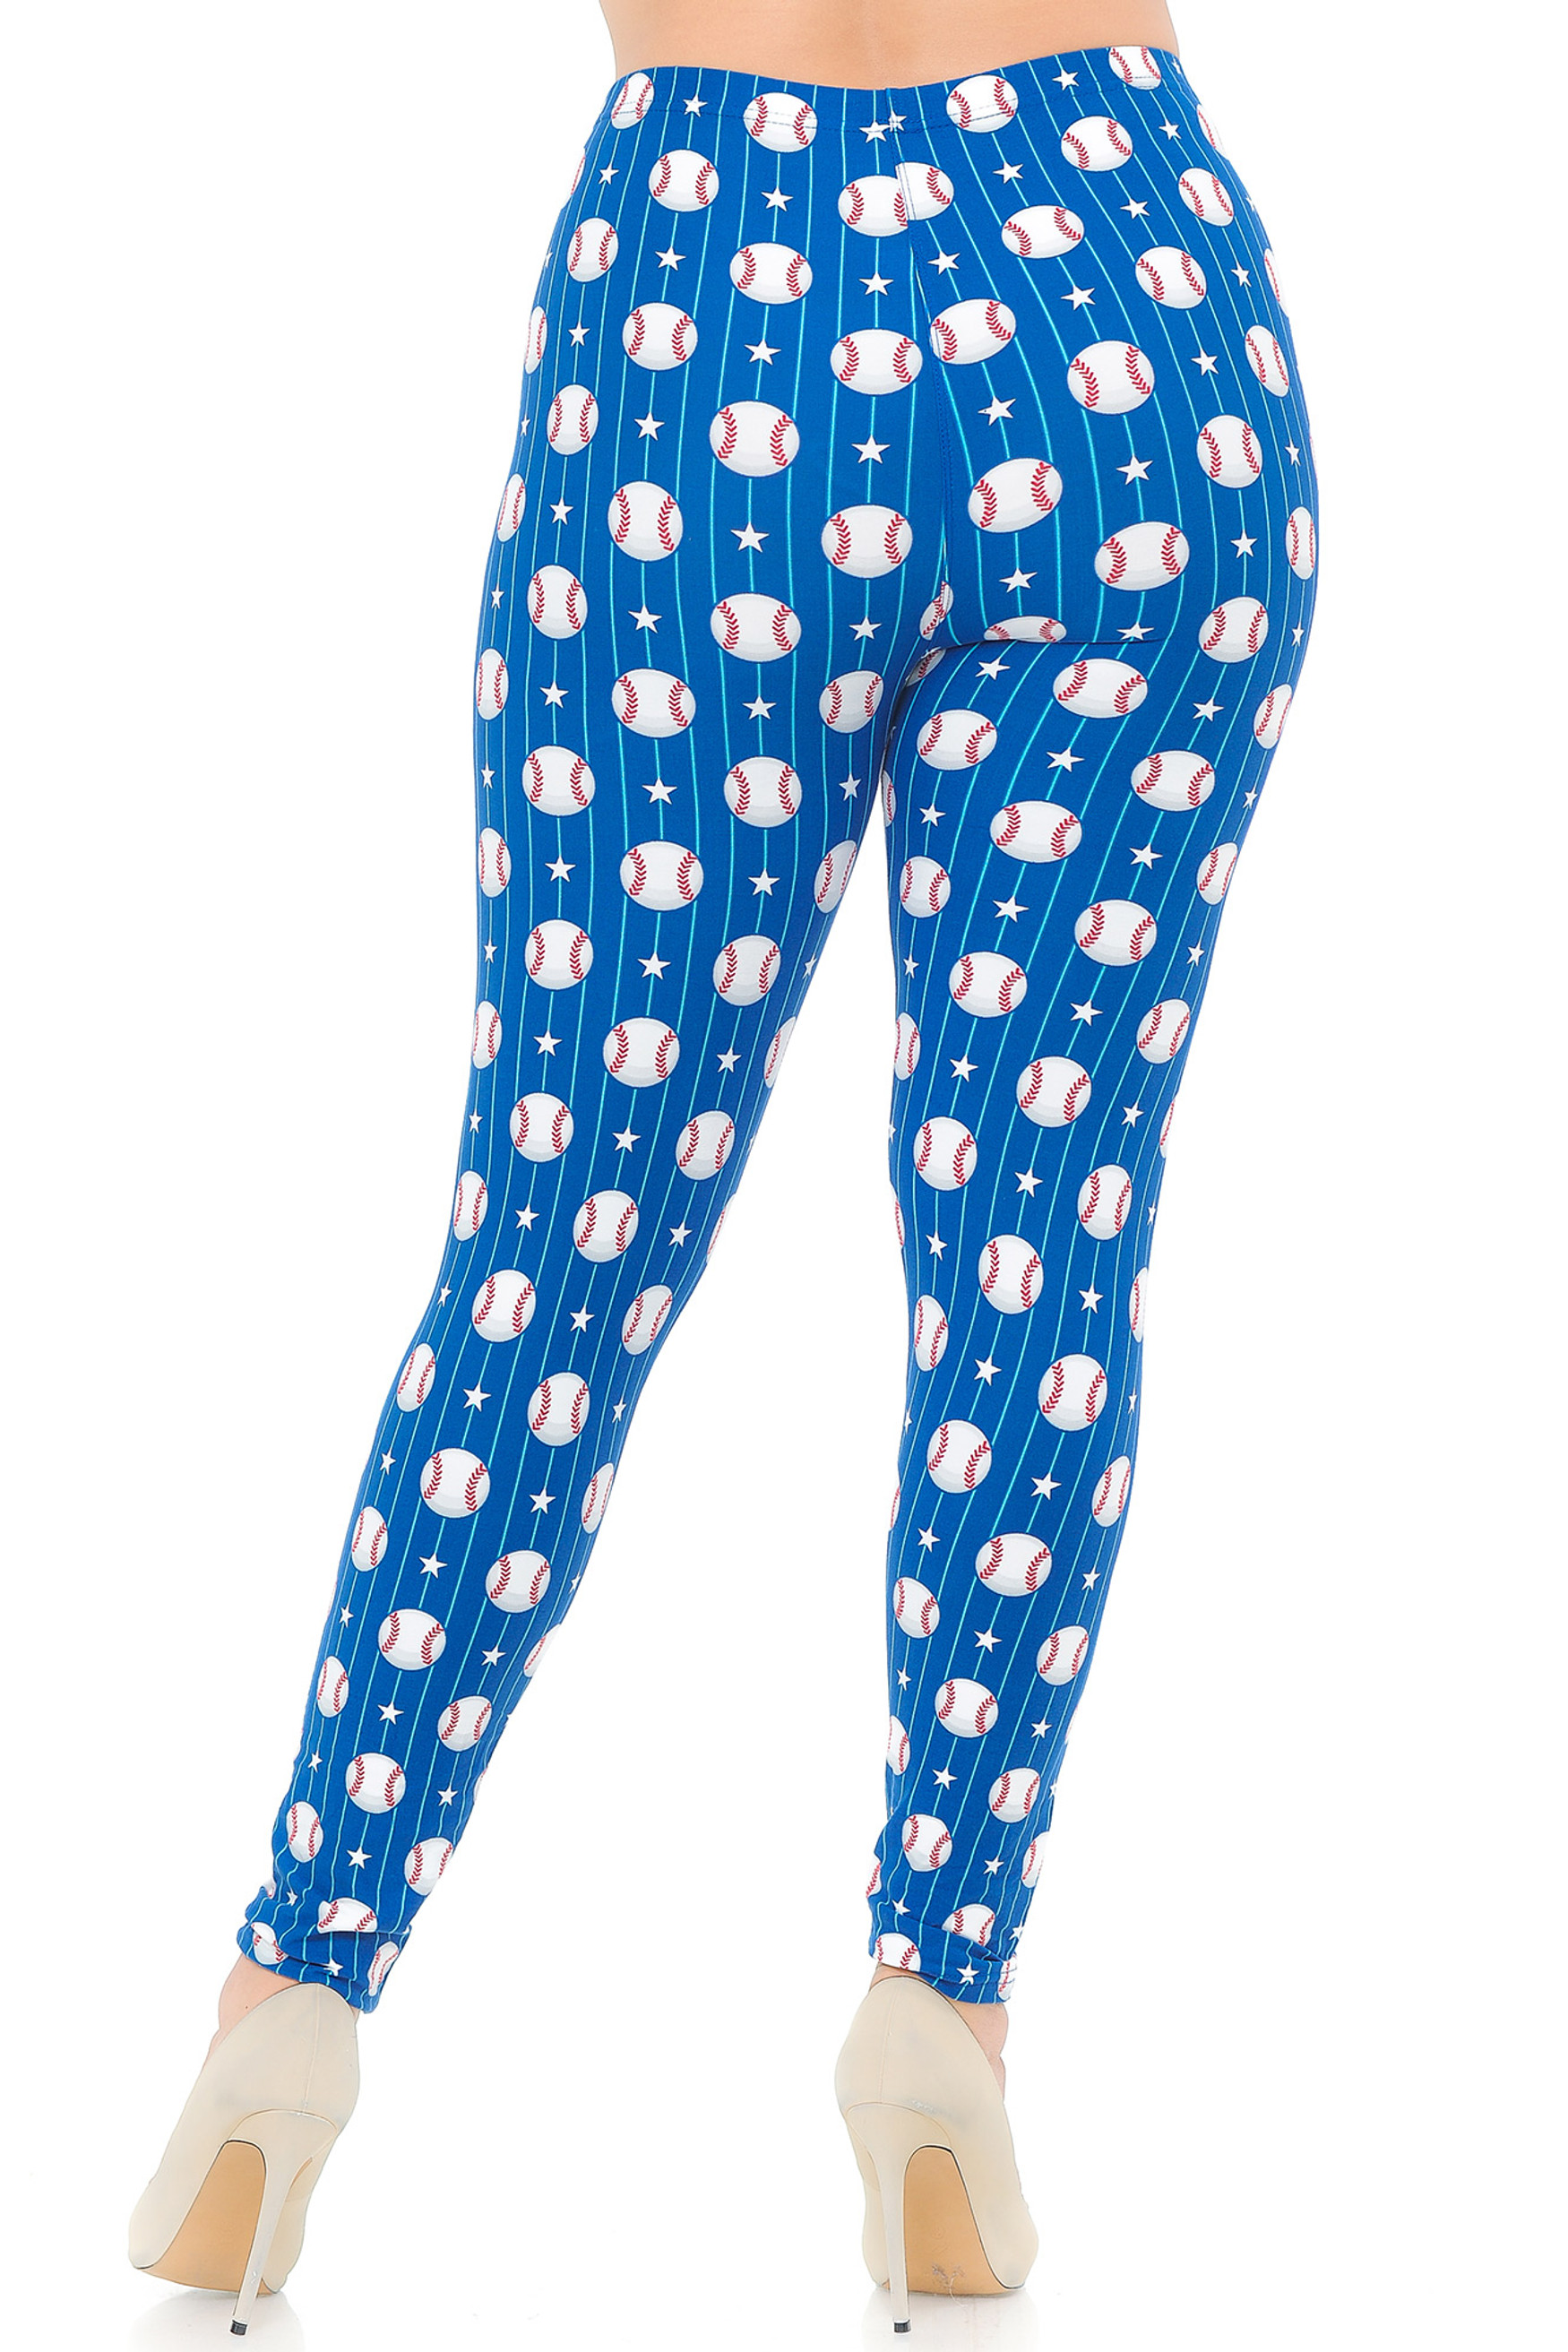 Buttery Soft Love of Baseball Extra Plus Size Leggings - 3X-5X